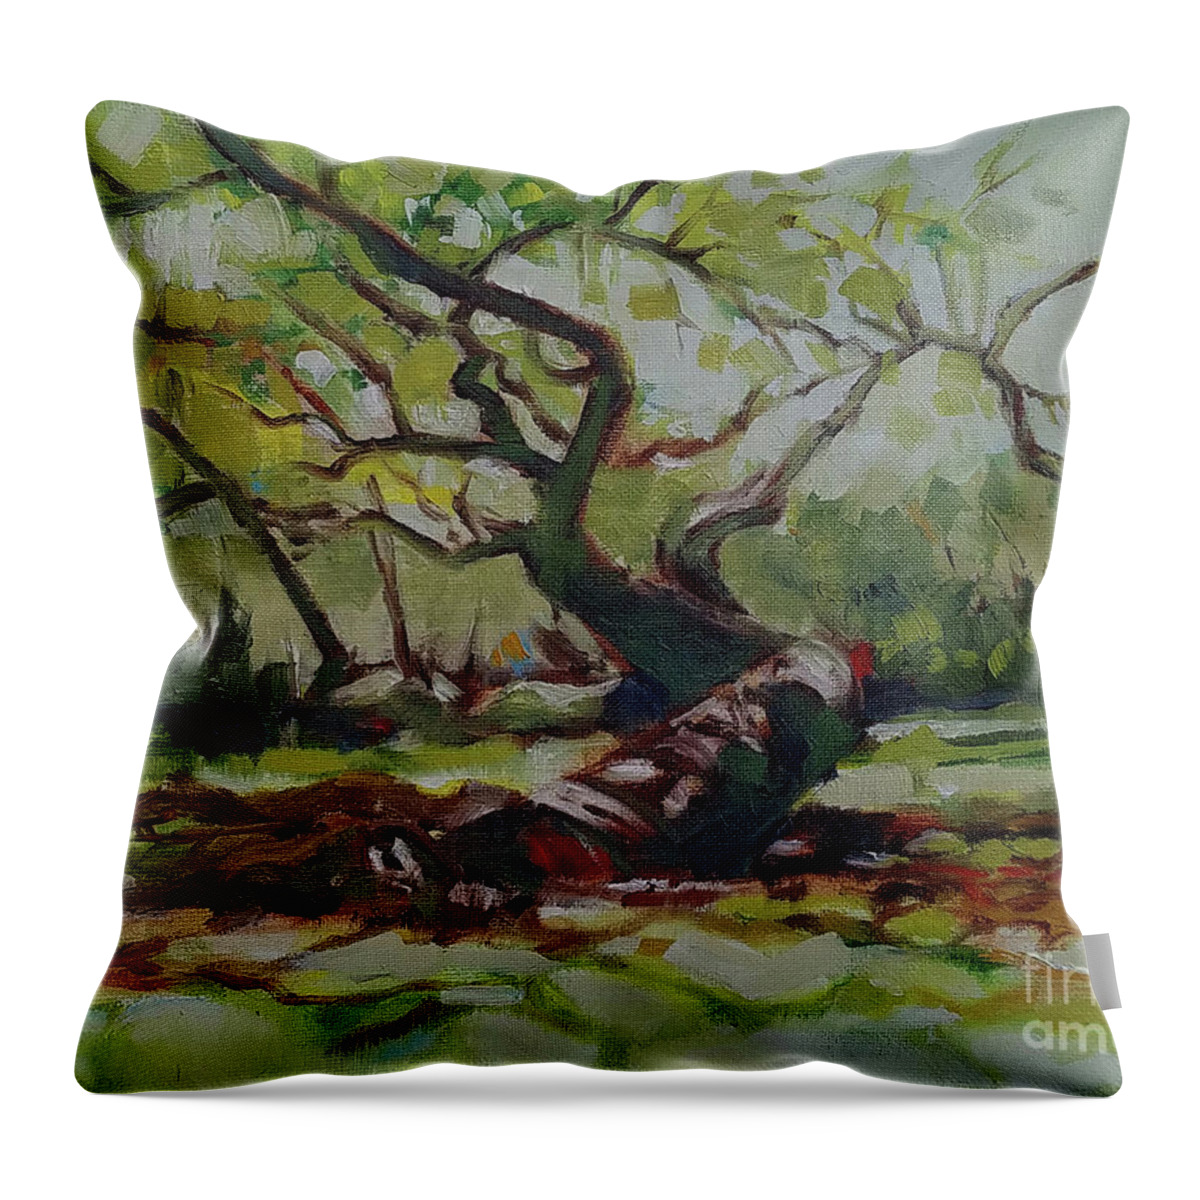 Oak Throw Pillow featuring the painting Winding oak by Mary Hubley